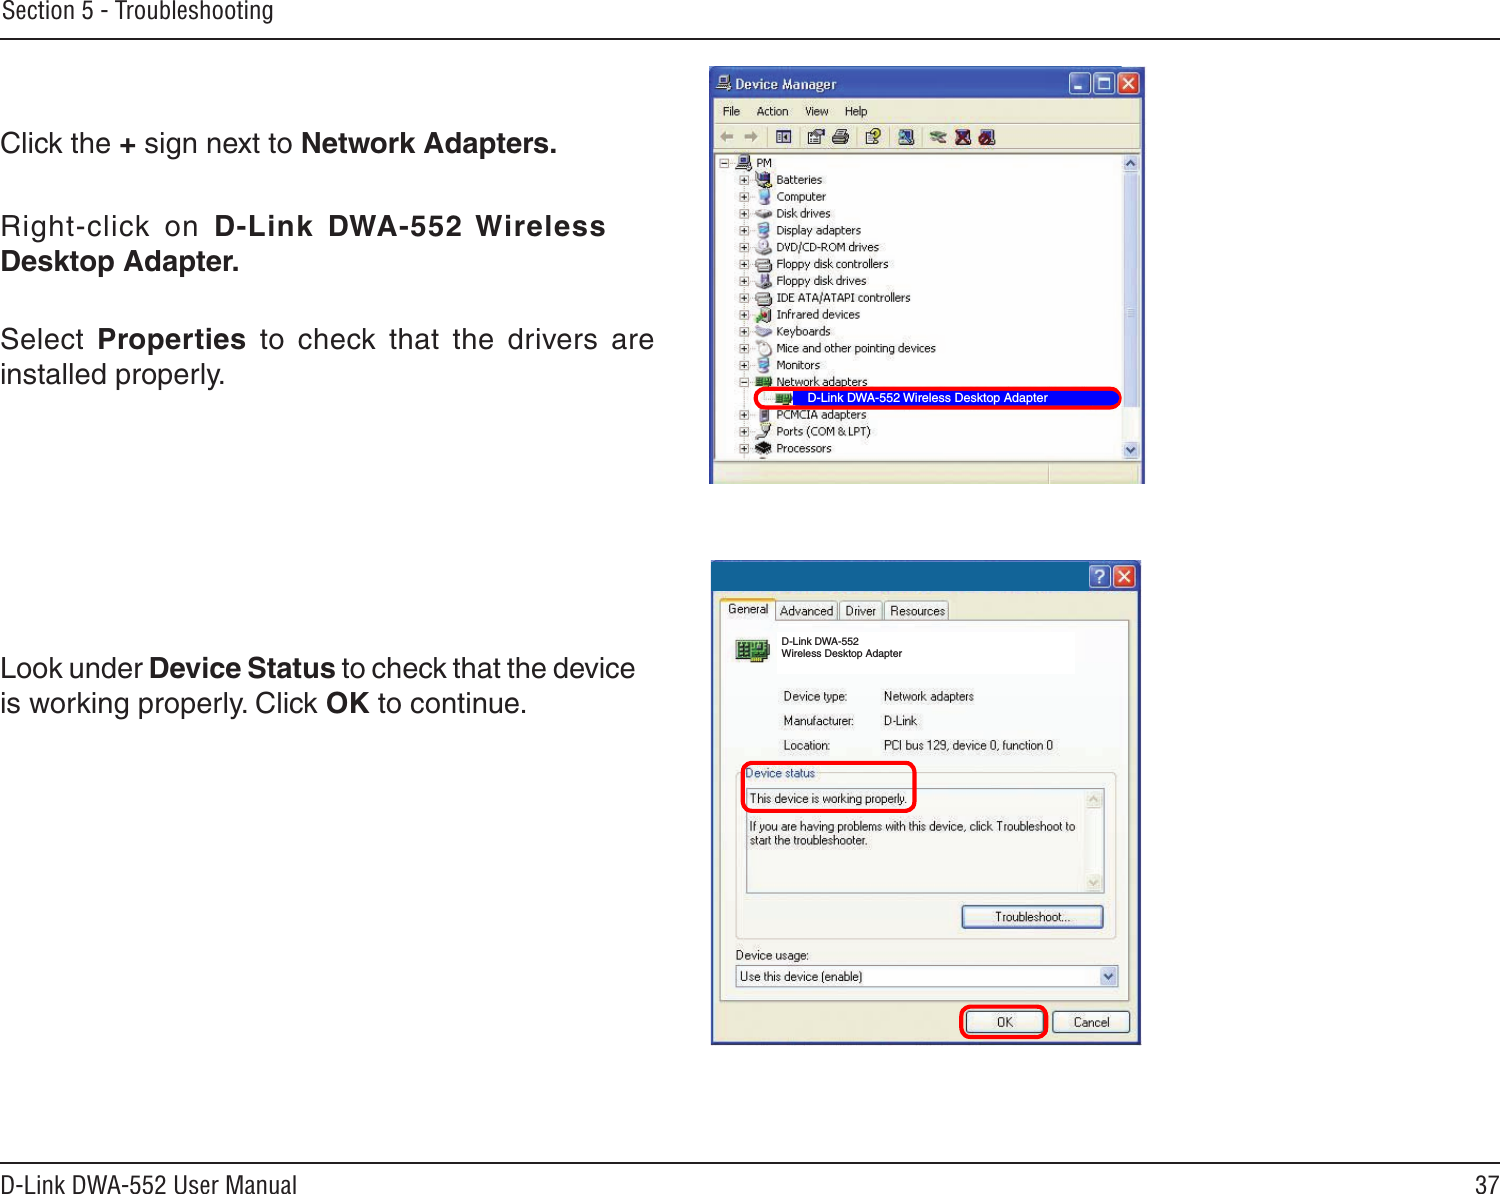 37D-Link DWA-552 User ManualSection 5 - TroubleshootingClick the + sign next to Network Adapters.Right-click  on  D-Link  DWA-552 Wireless Desktop Adapter.Select  Properties  to  check  that  the  drivers  are installed properly.Look under Device Status to check that the device is working properly. Click OK to continue.D-Link DWA-552 Wireless Desktop AdapterD-Link DWA-552 Wireless Desktop Adapter